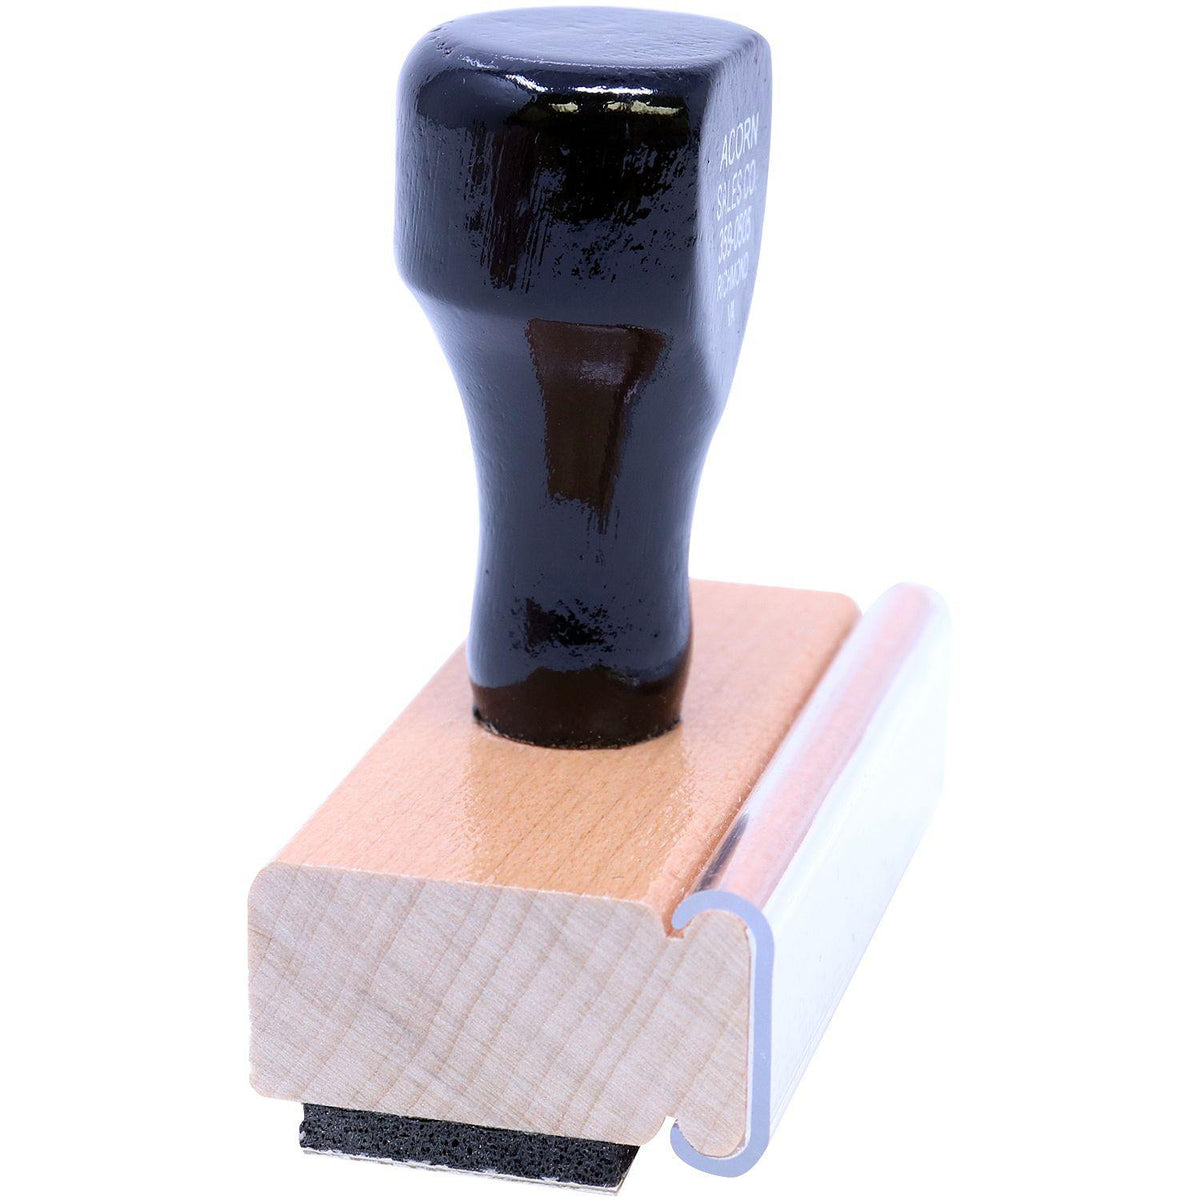 Side View of Large Received with Date Box Rubber Stamp at an Angle